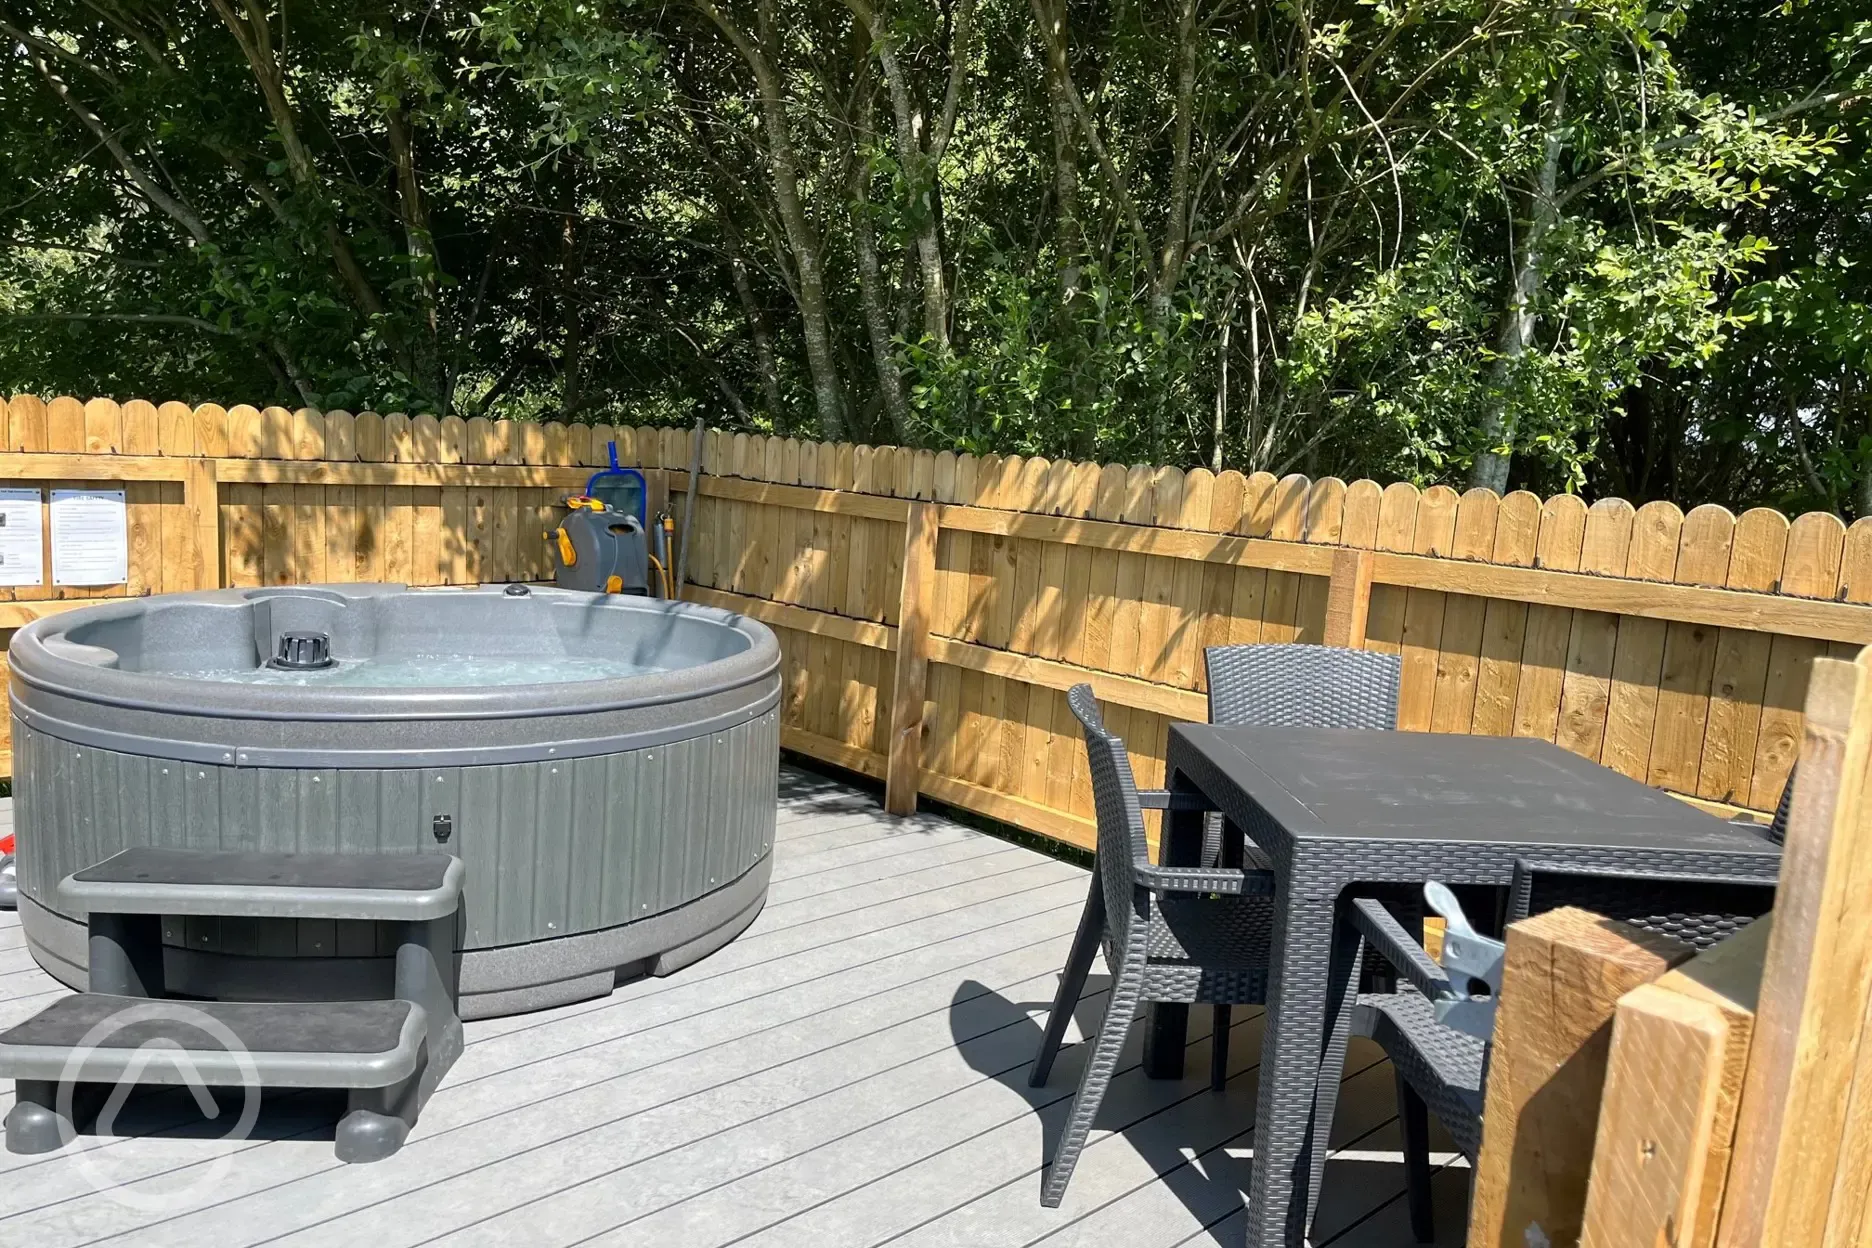 Fully serviced pitches with hot tub